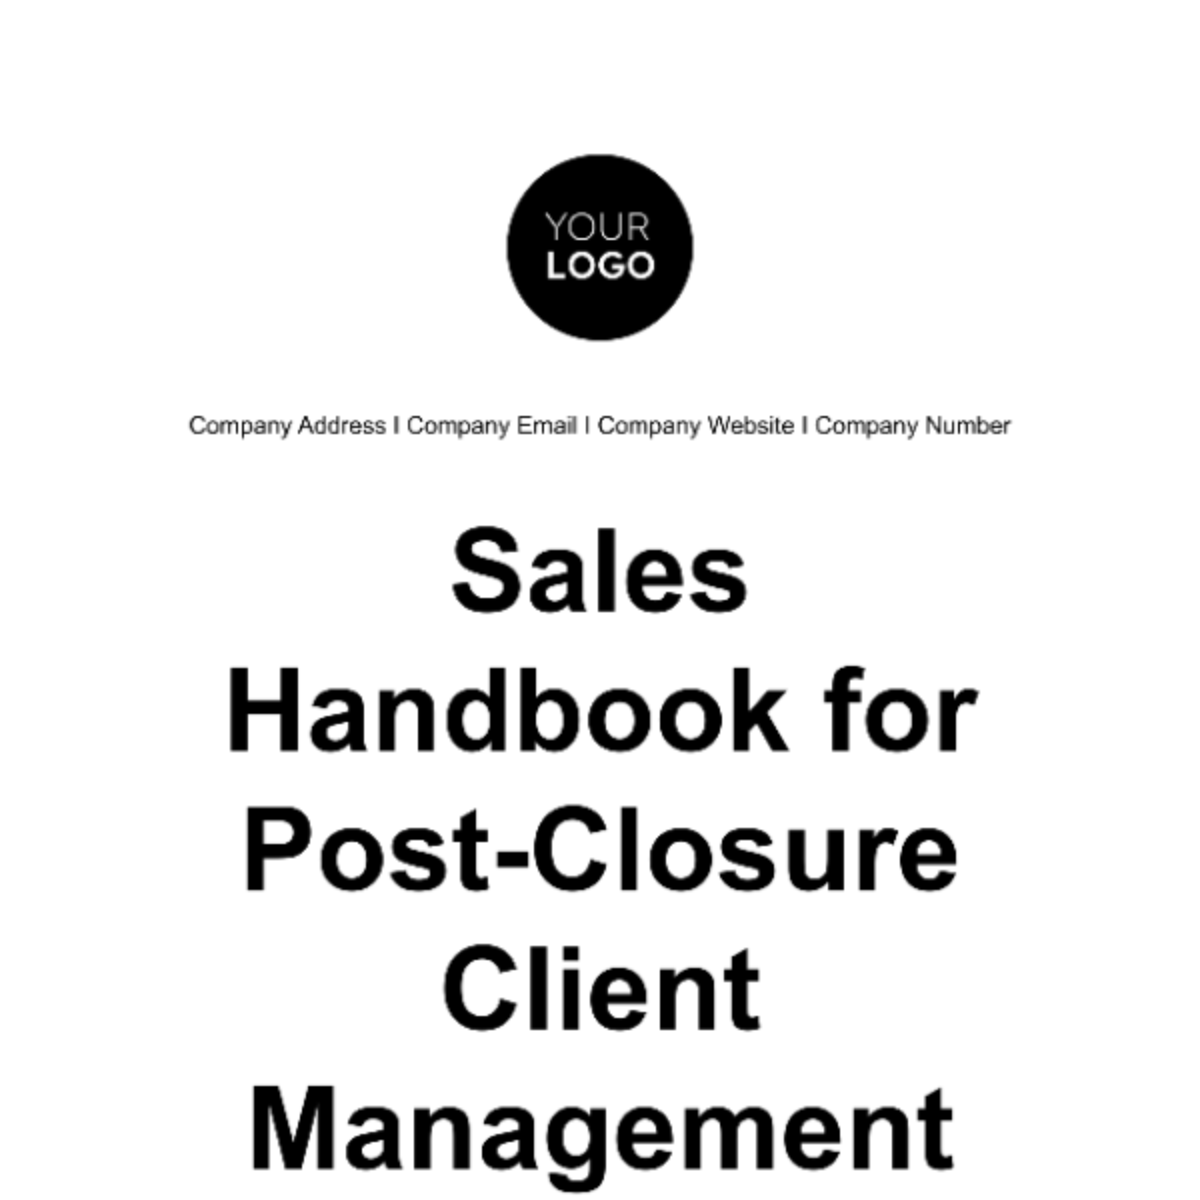 Free Sales Handbook for Post-Closure Client Management Template